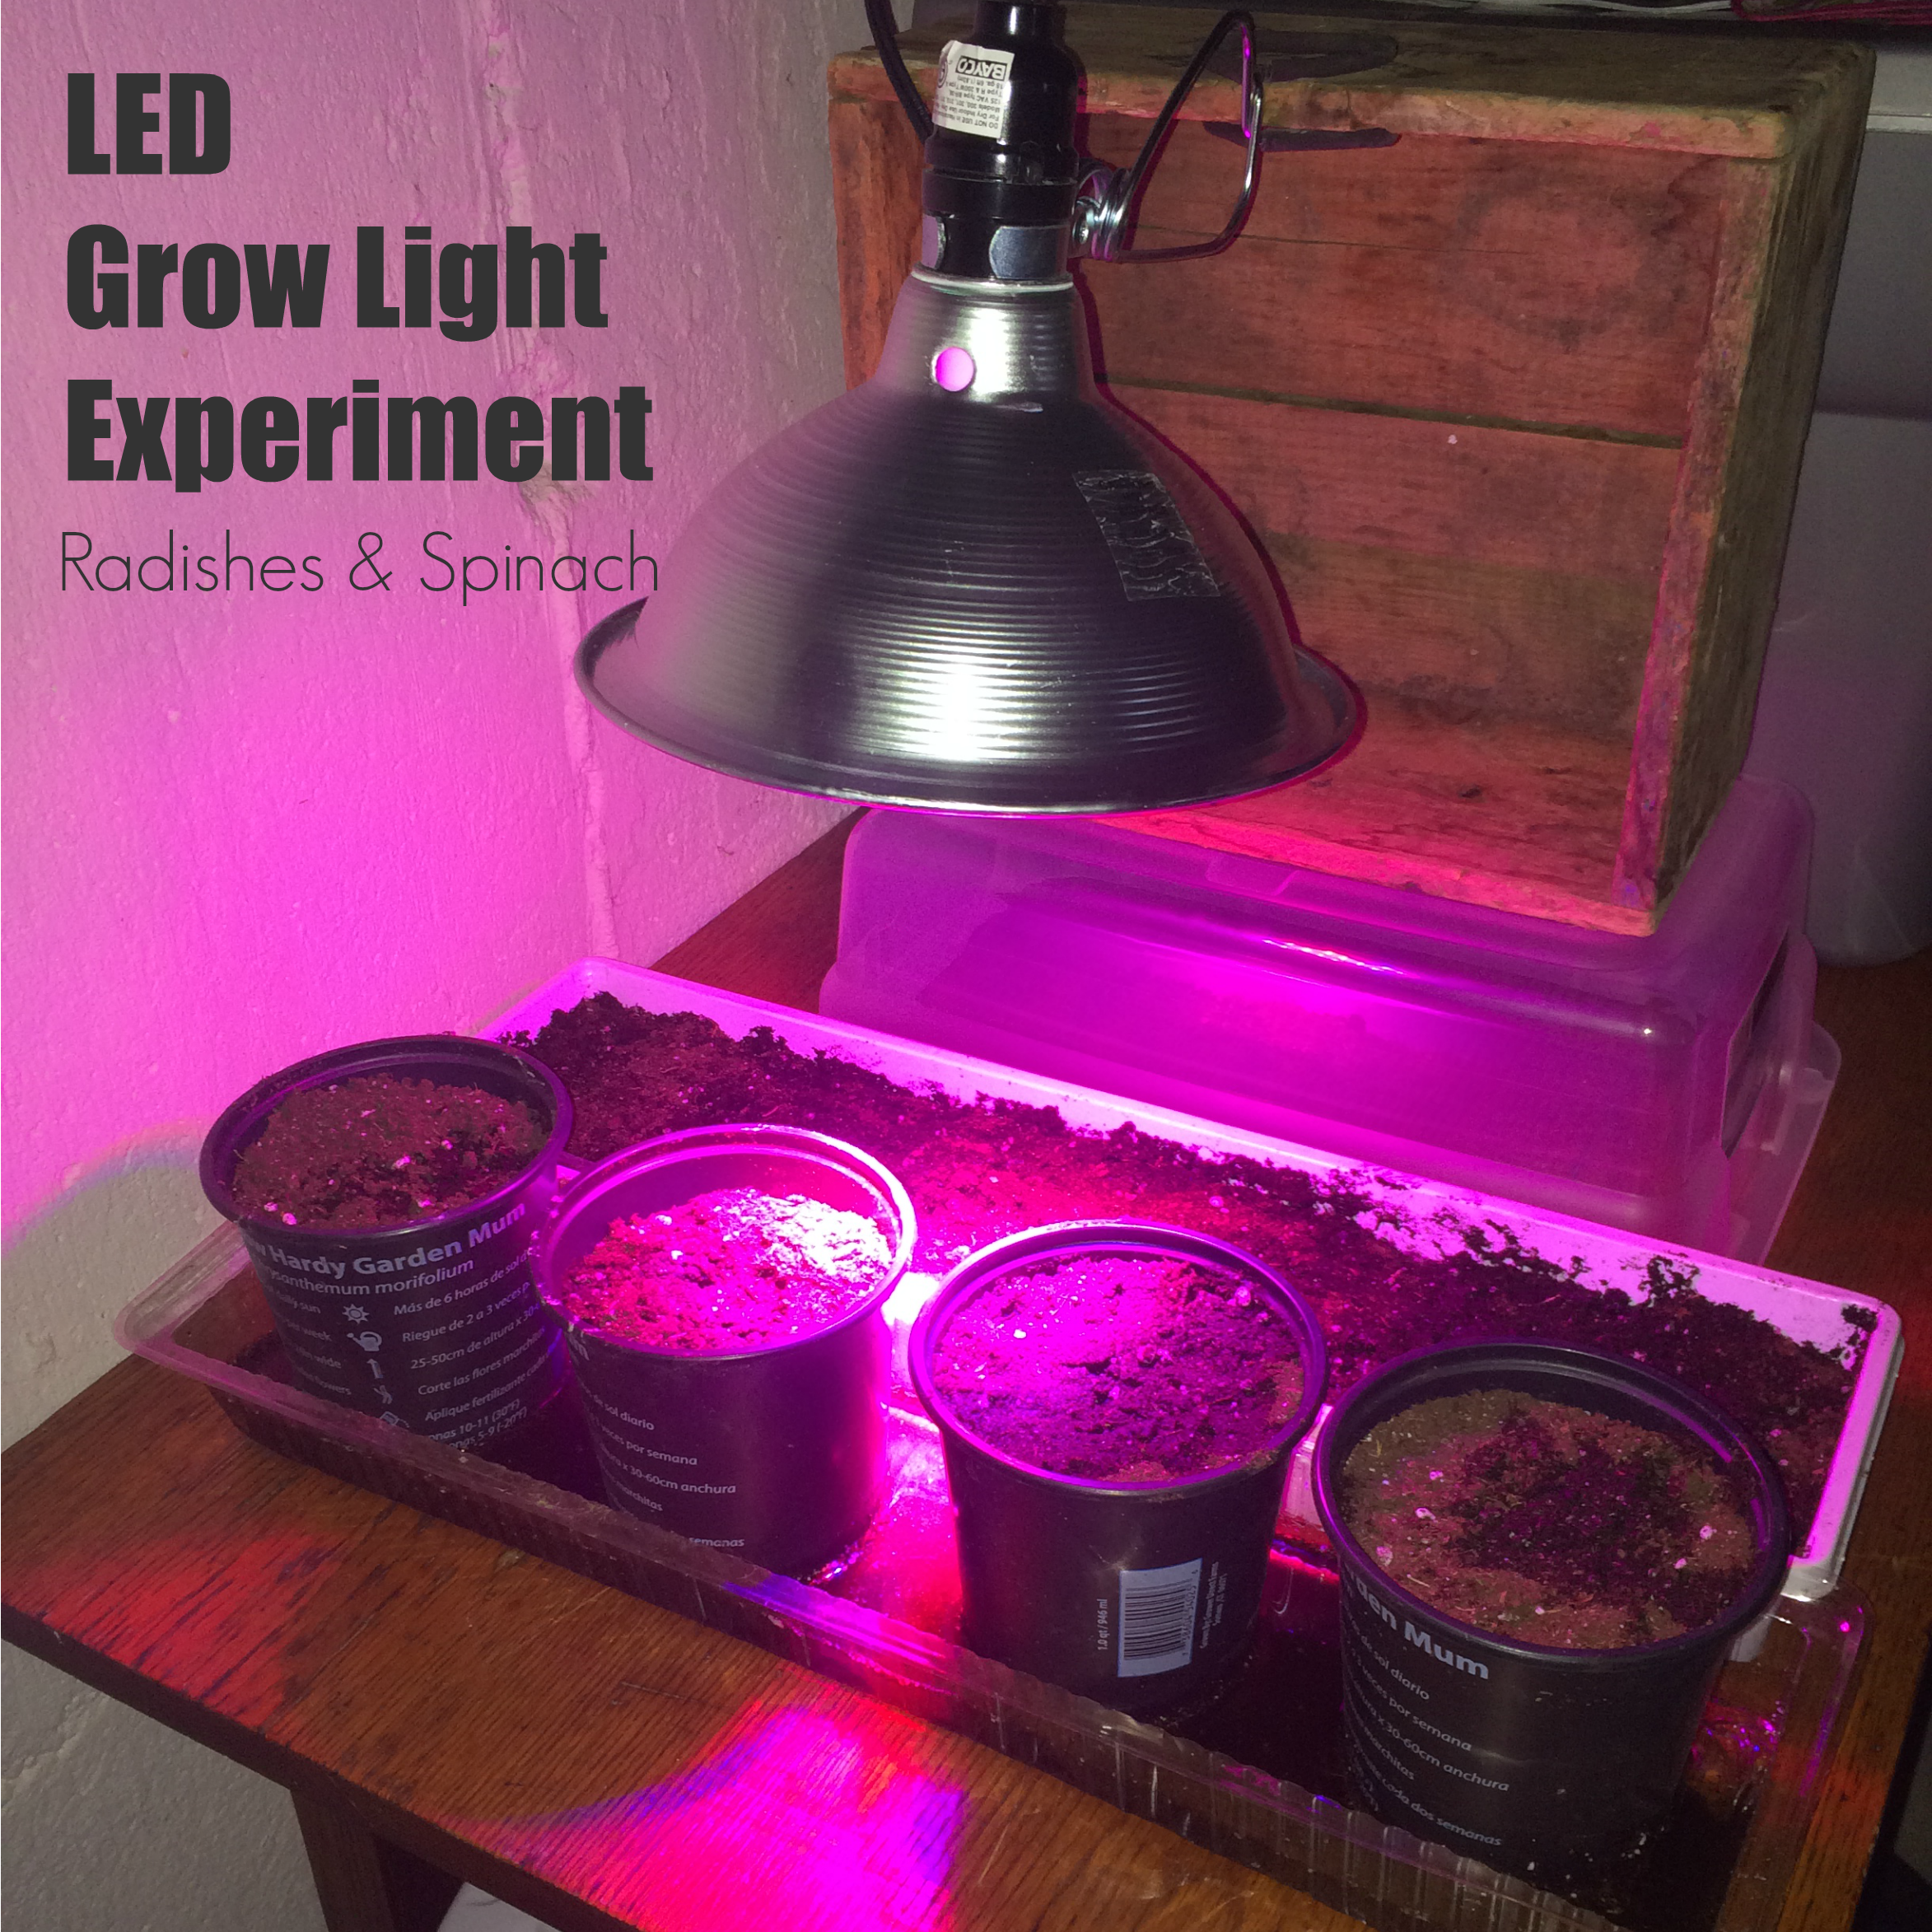 Growing Radishes & Spinach Indoors: LED 12W Grow light (video)